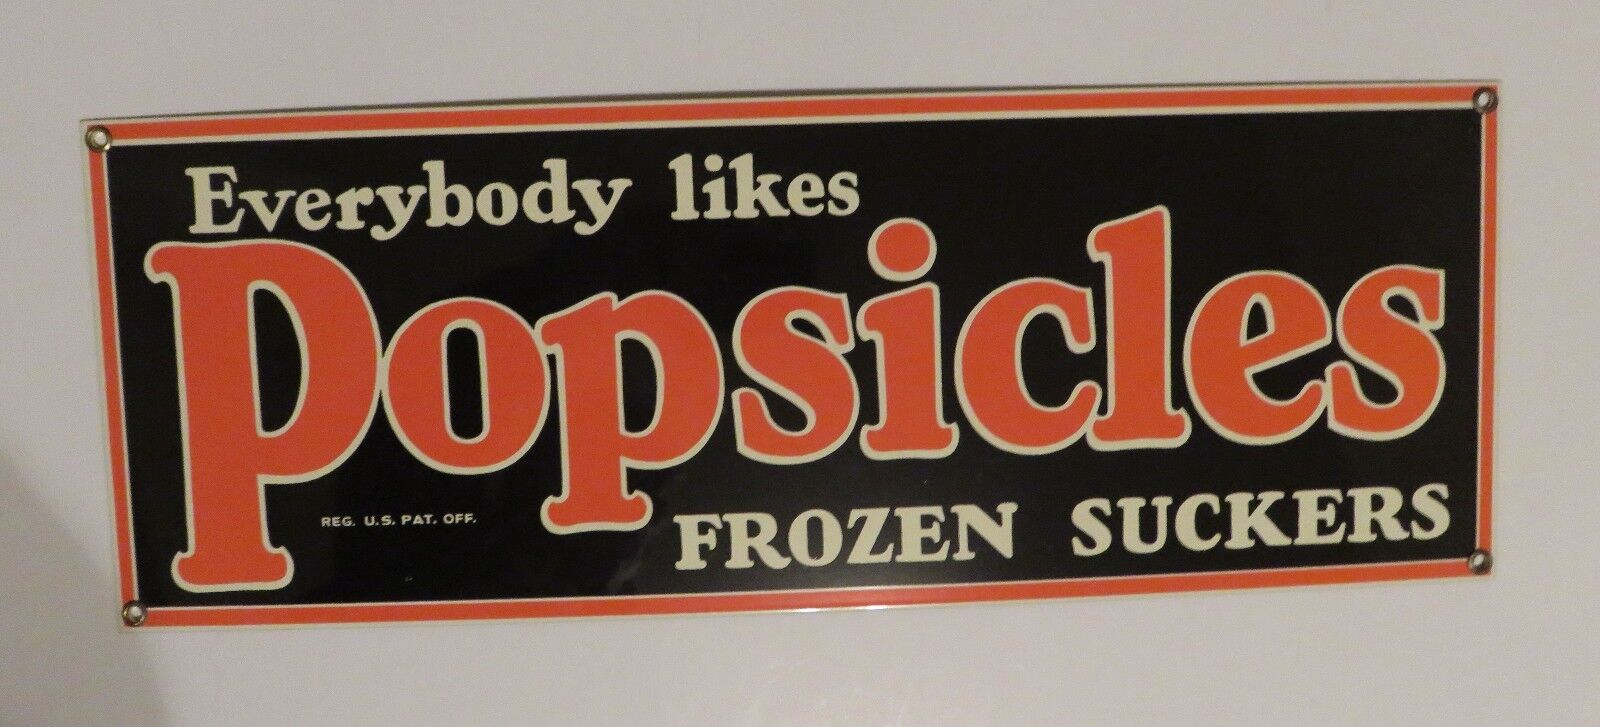 Everybody Likes Popsicles, Frozen Suckers. 18\